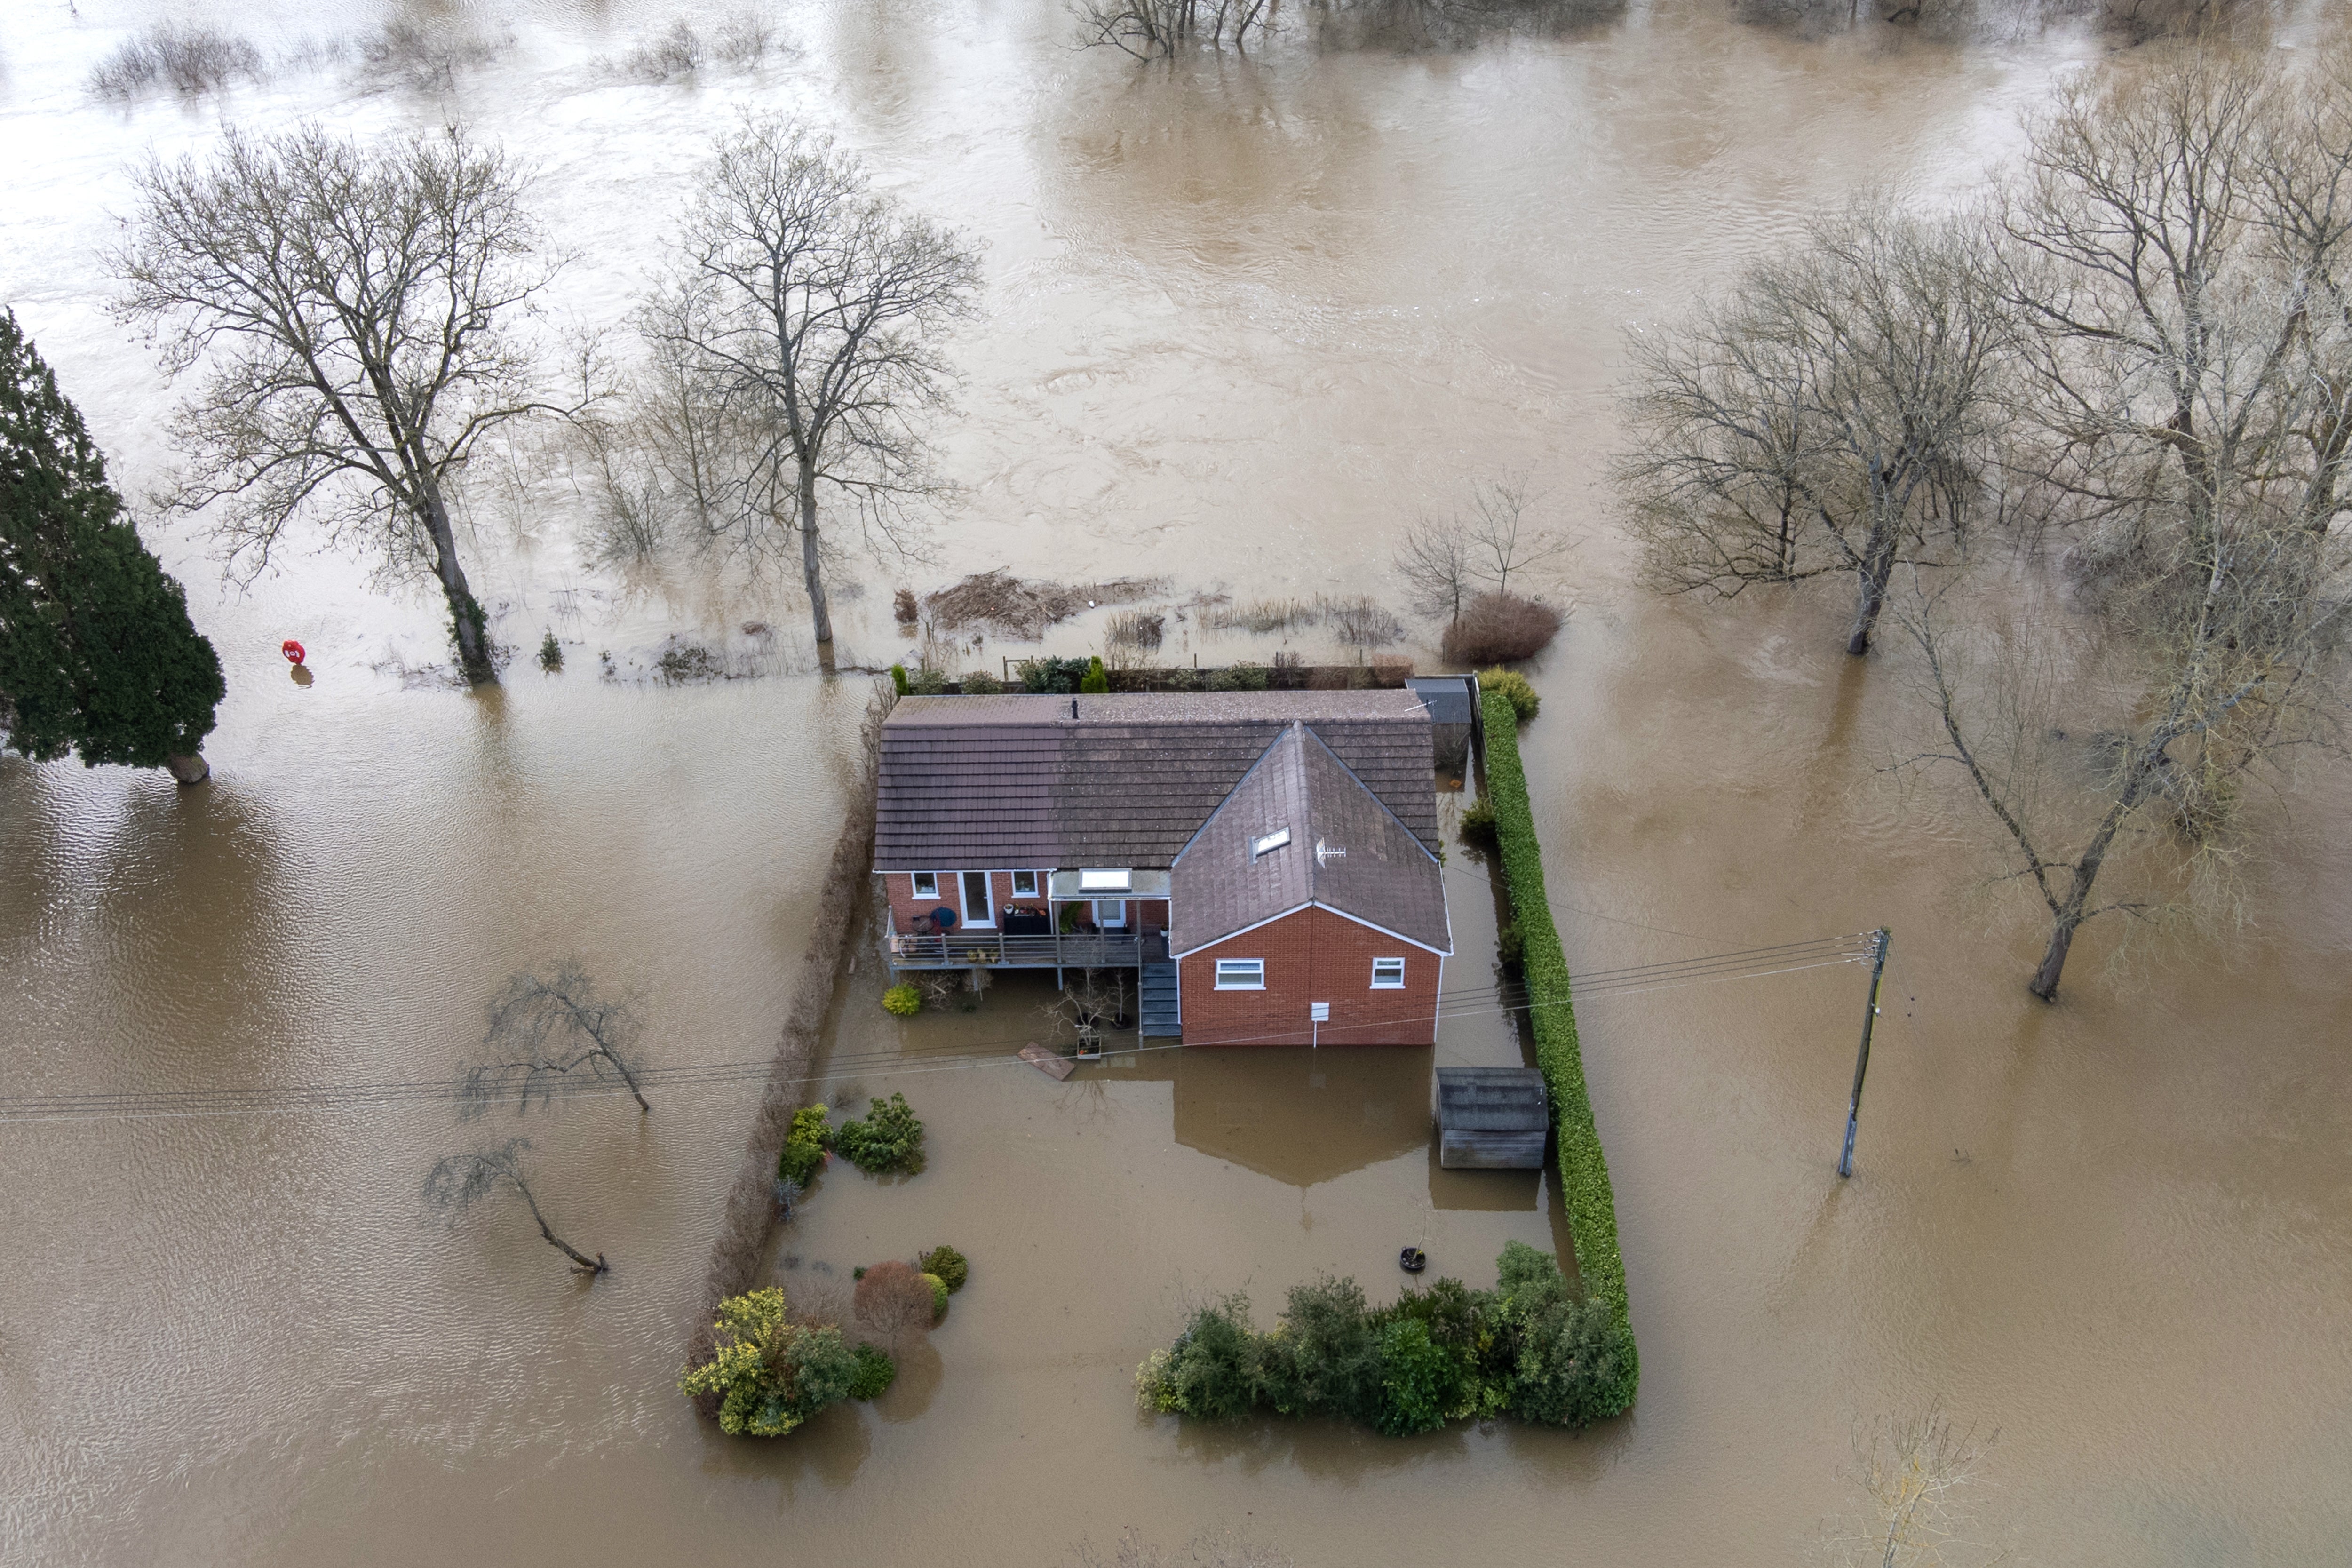 The UK saw three back-to-back storms at the start of the year